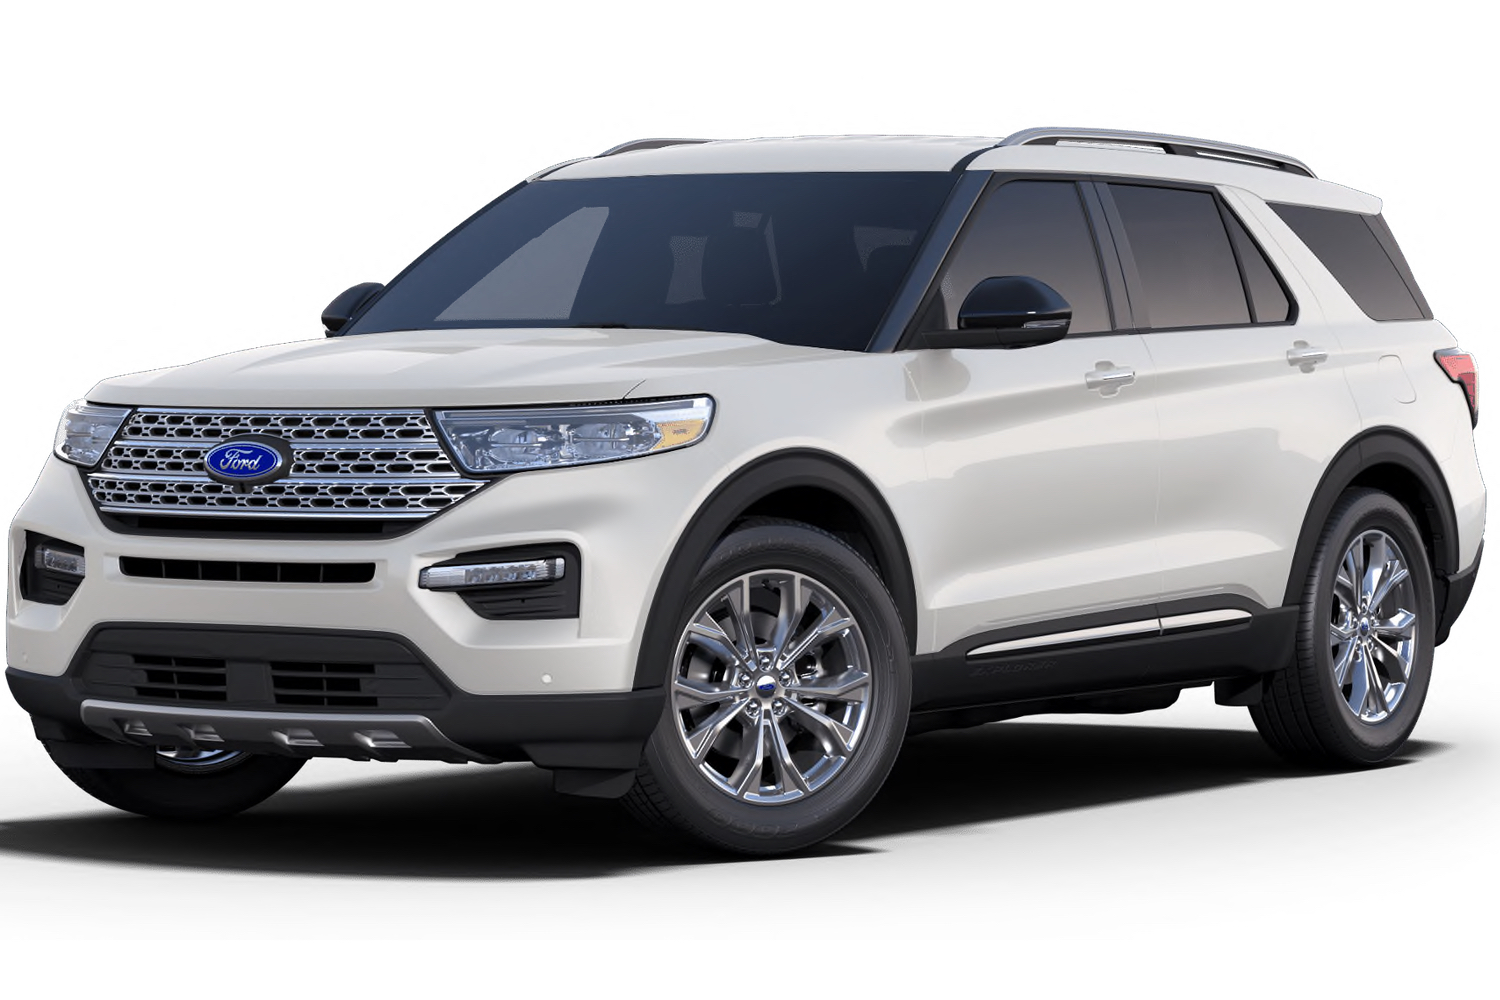 2020 Ford Explorer Gets New Star White Color First Look